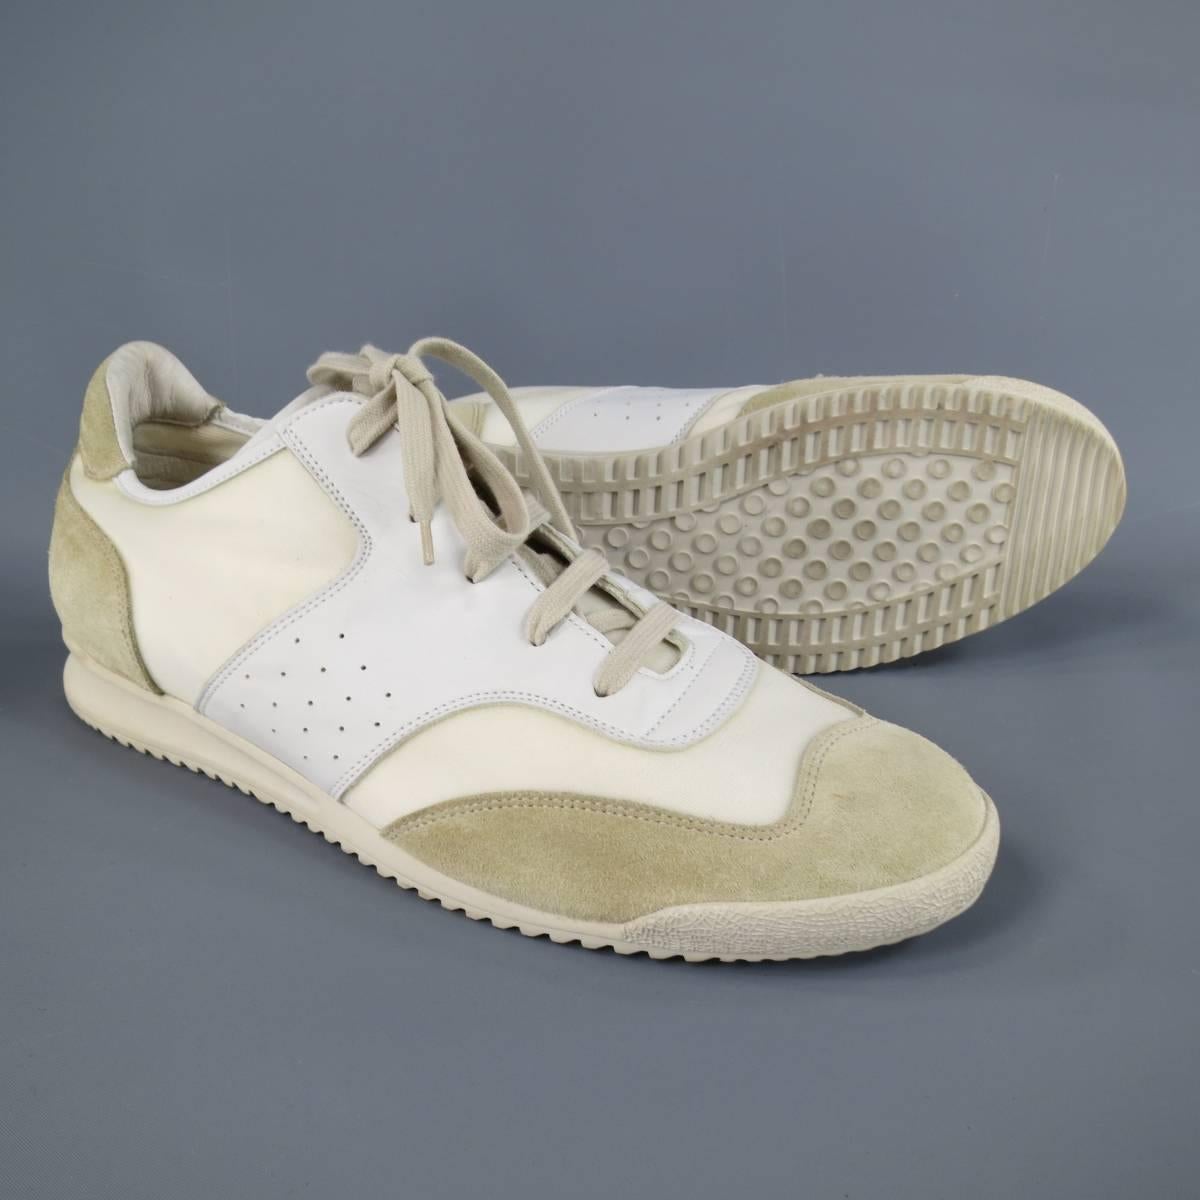 Unique MAISON MARTIN MARGIELA sneakers in a creamy beige textured canvas with beige sued and off white smooth leather panels, with a classic khaki sole. Made in Italy.
 
Excellent Pre-Owned Condition.
Marked: IT 46
 
Insole: 12.25 X 4 in.